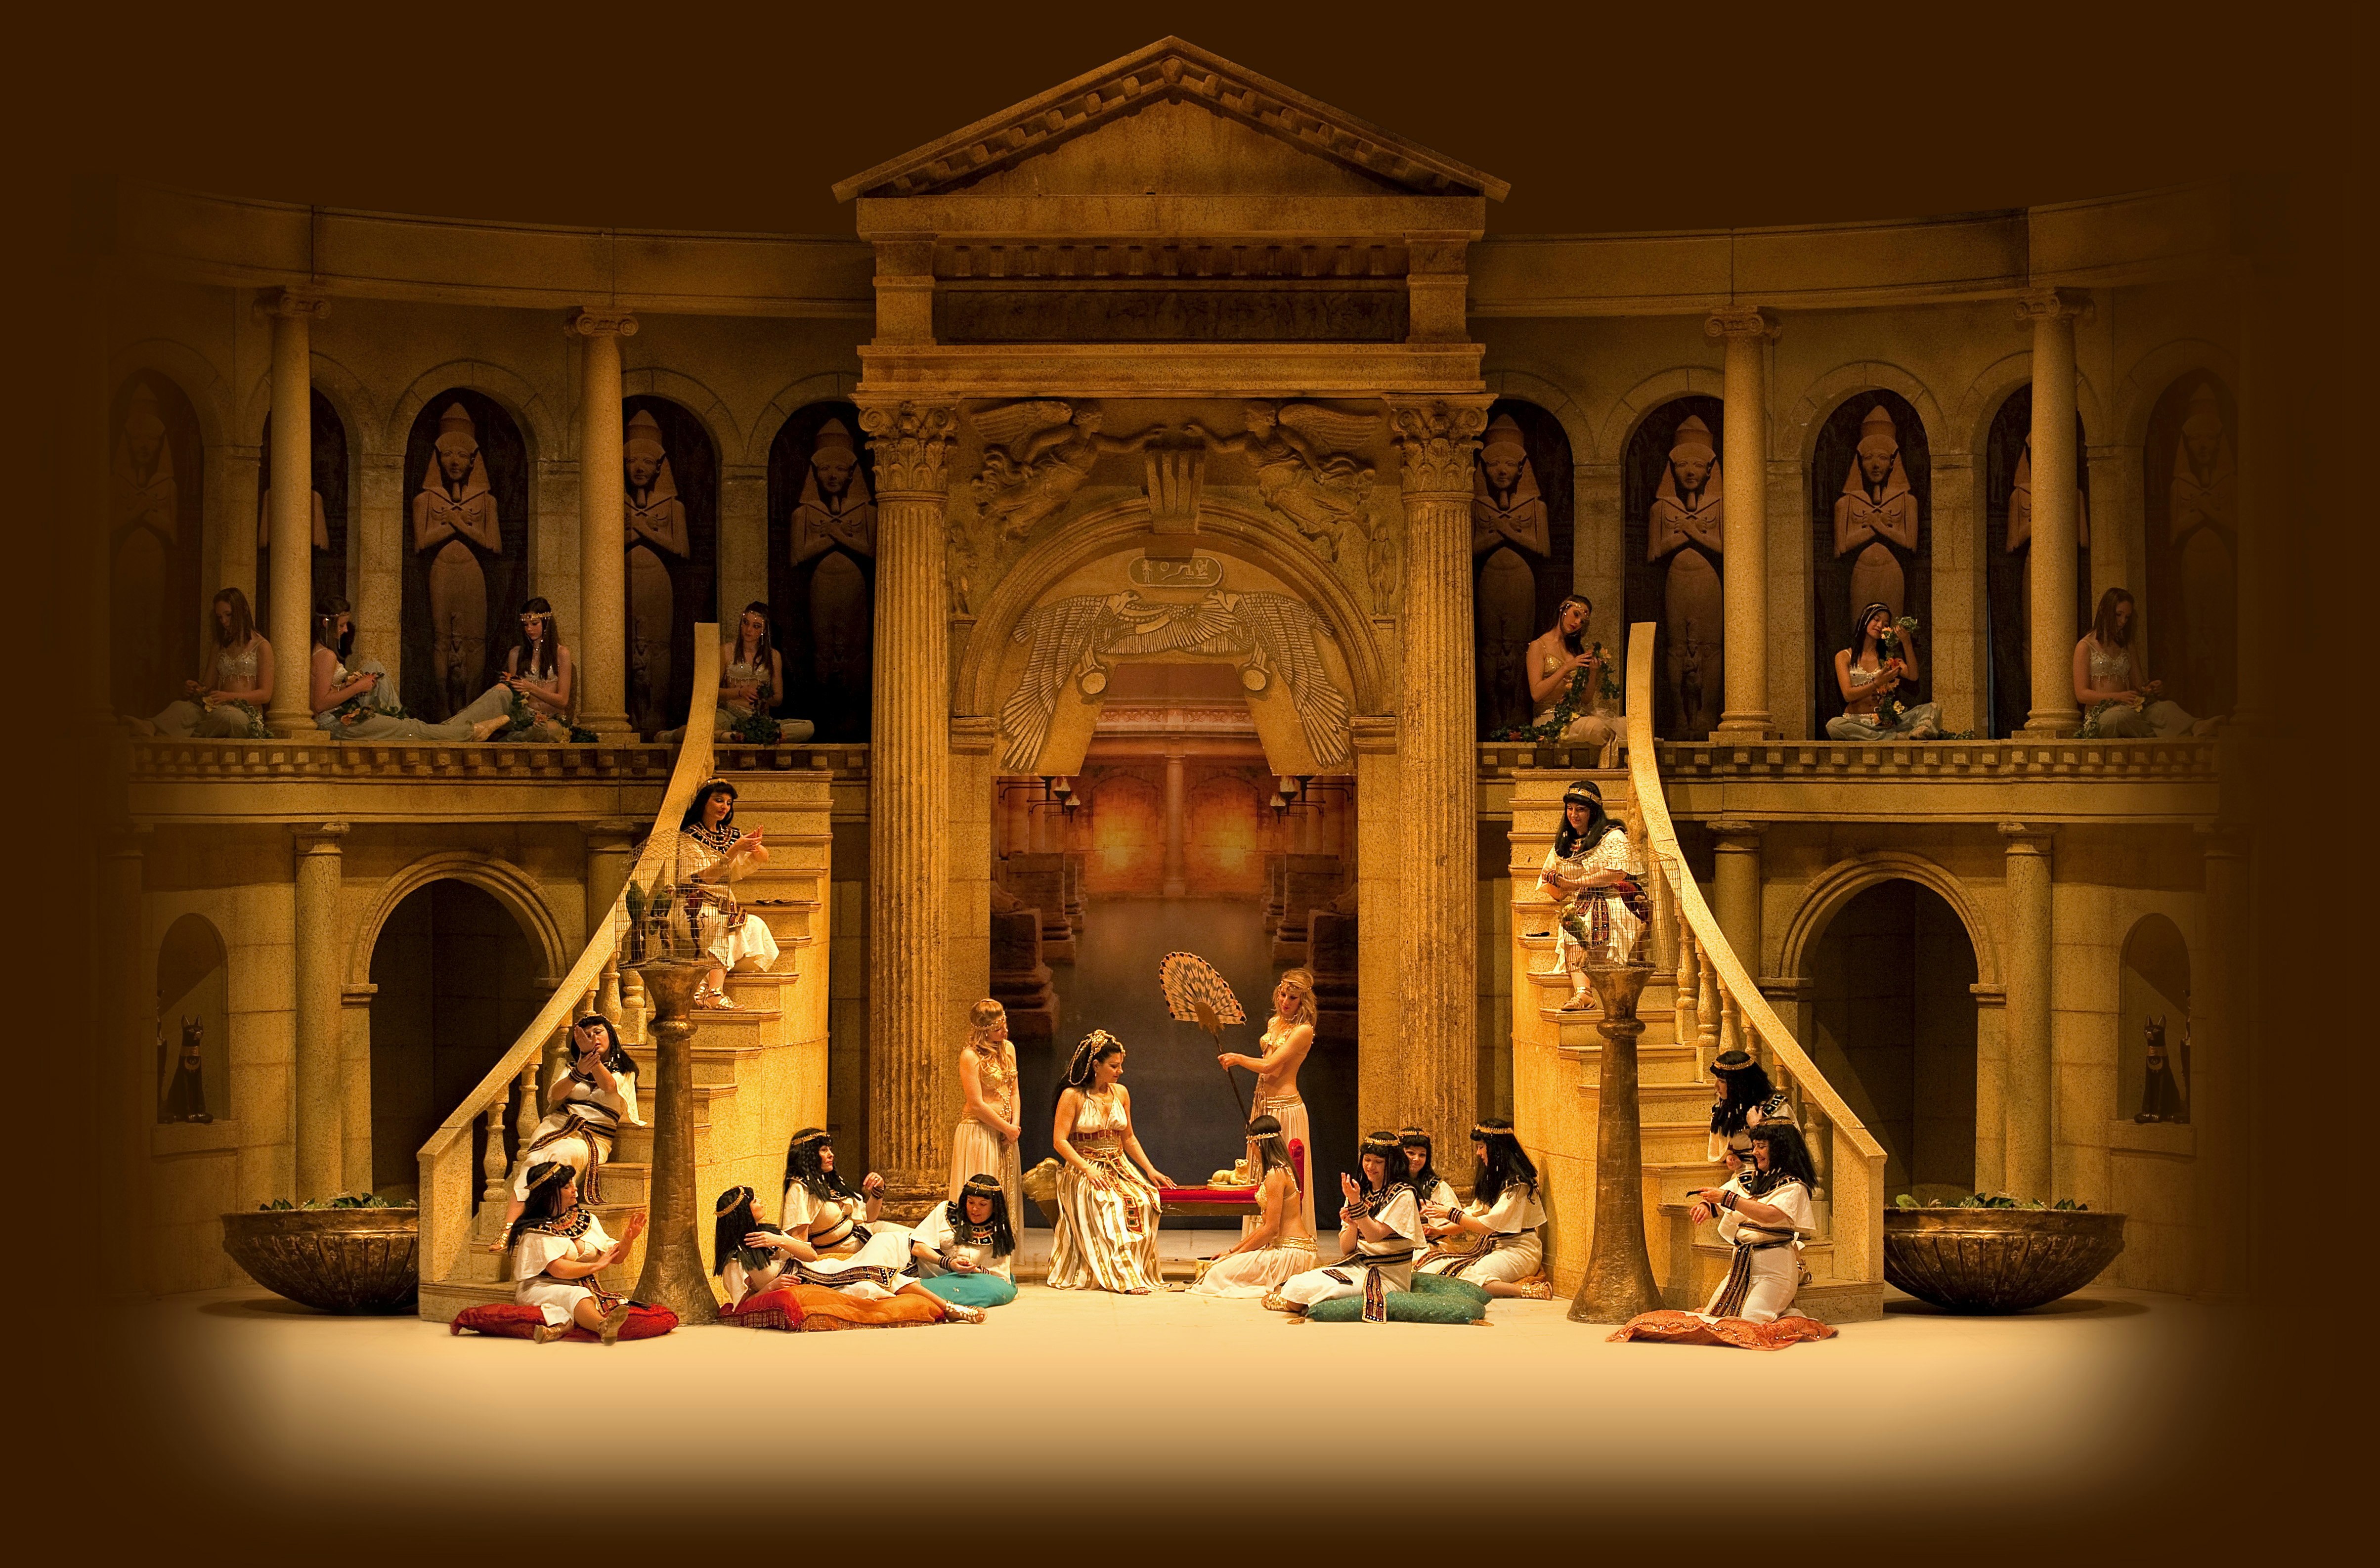 Image from the opera show Aida